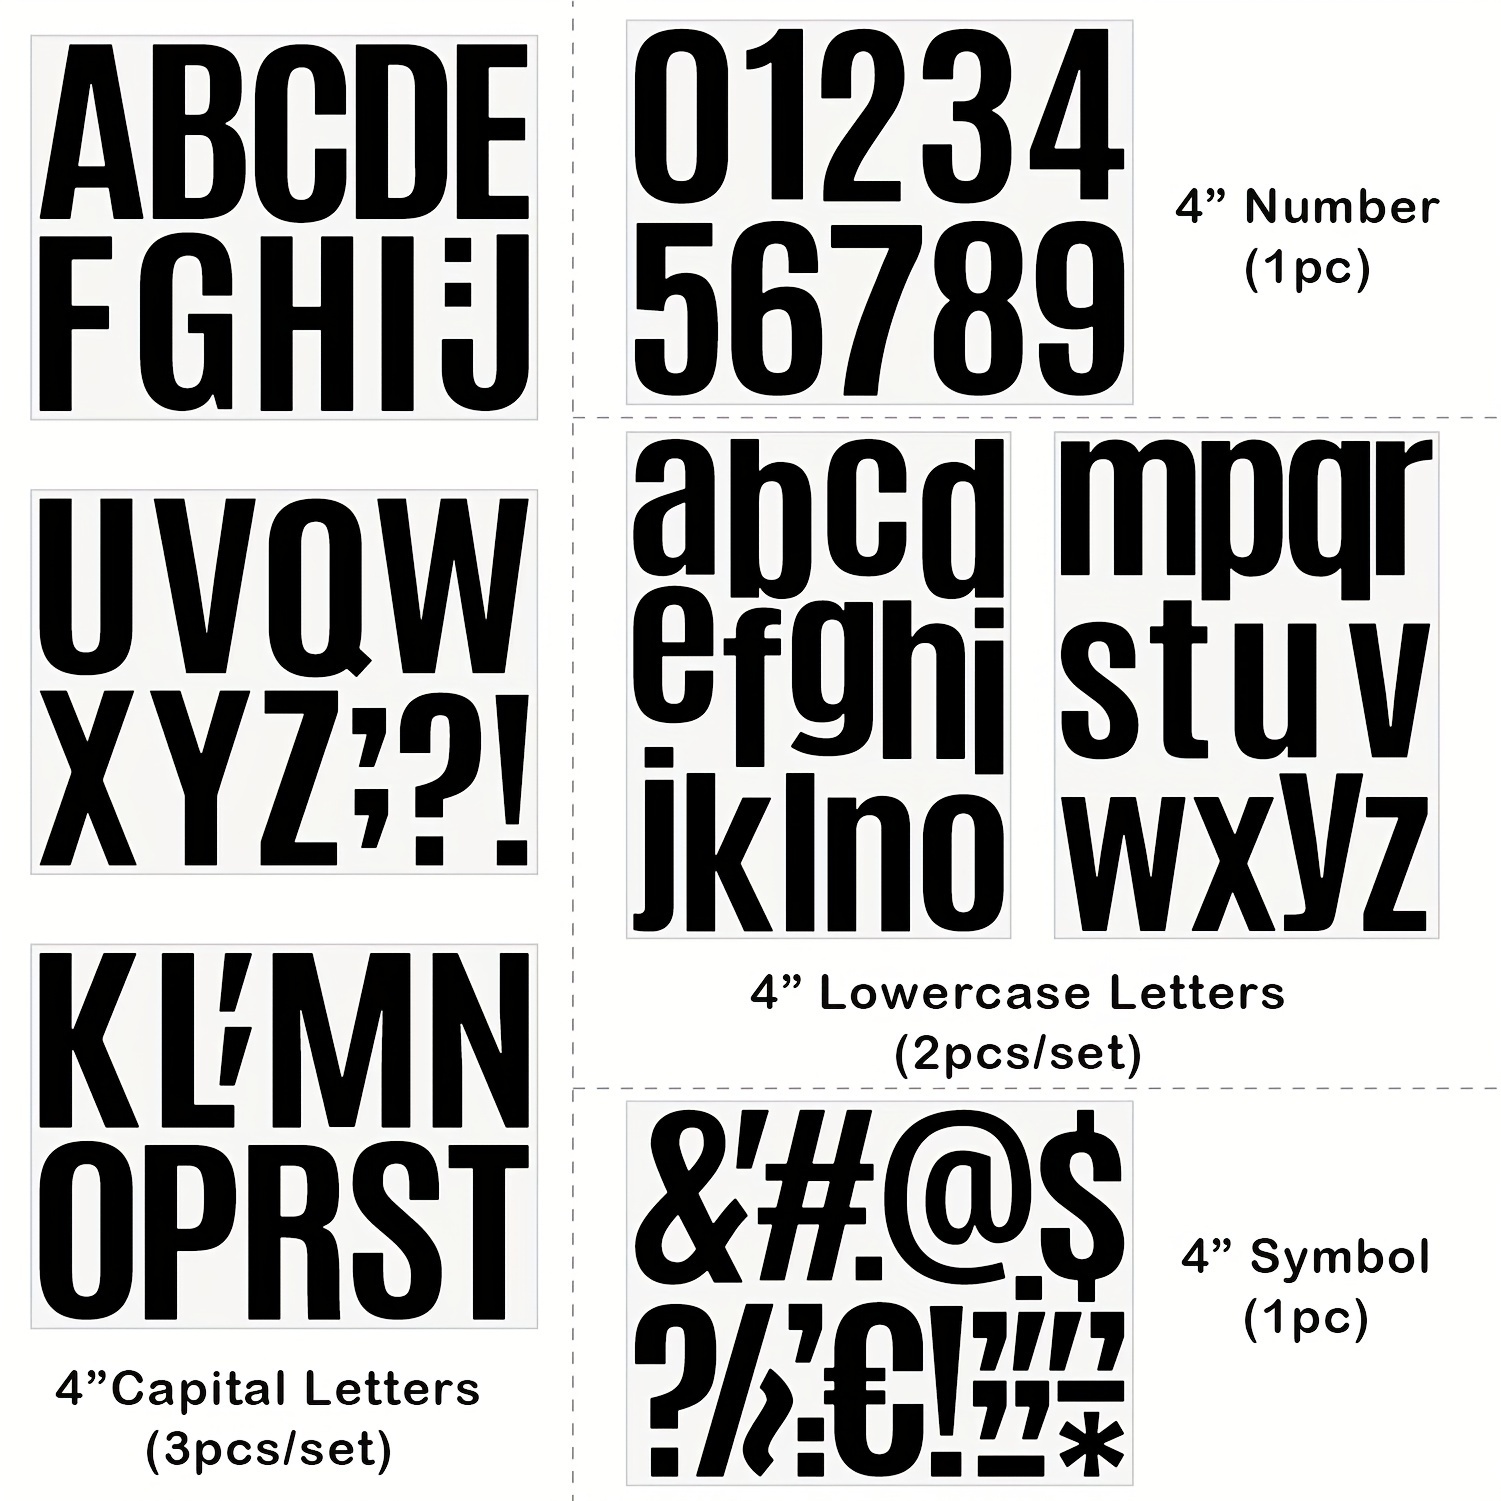 24 Sheets 2 Inch Self Adhesive Letters Stick on Vinyl Letters Capital  Letter Stickers Alphabet Sticker Letter Number 318 Vinyl Self-Adhesive  Sticker